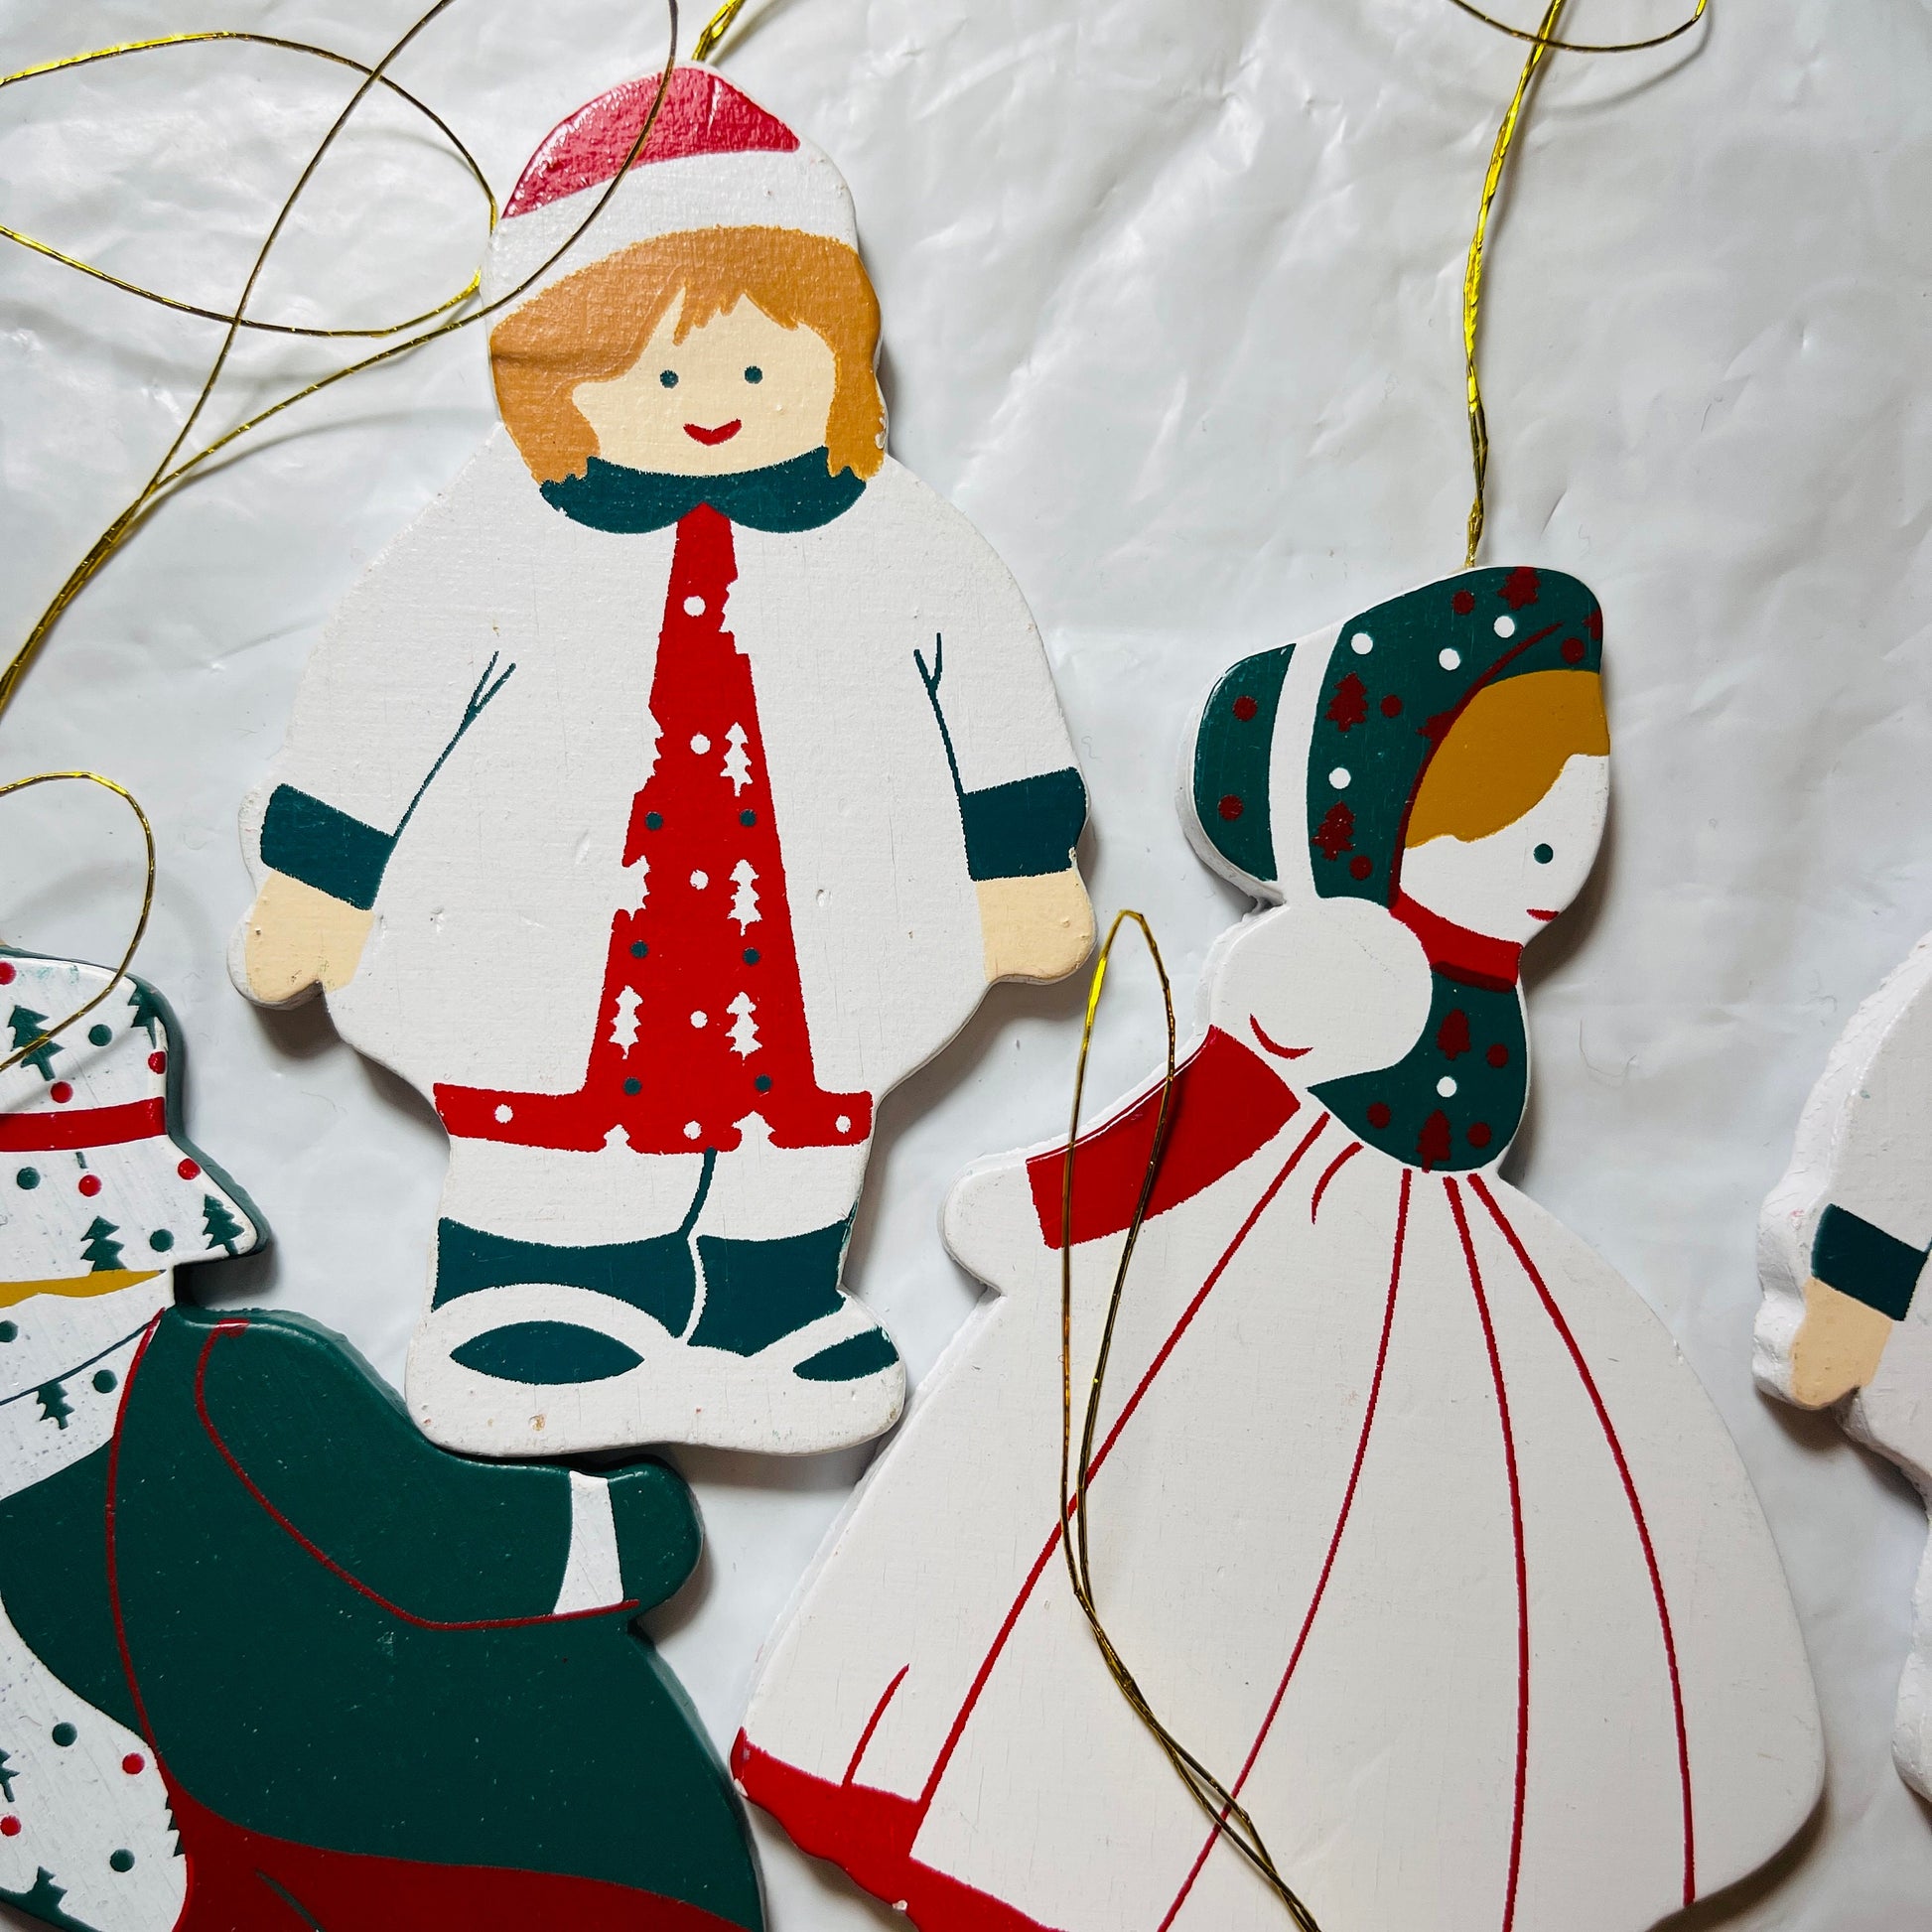 Wooden Girls and Boys, Set of 9, Christmas Ornaments